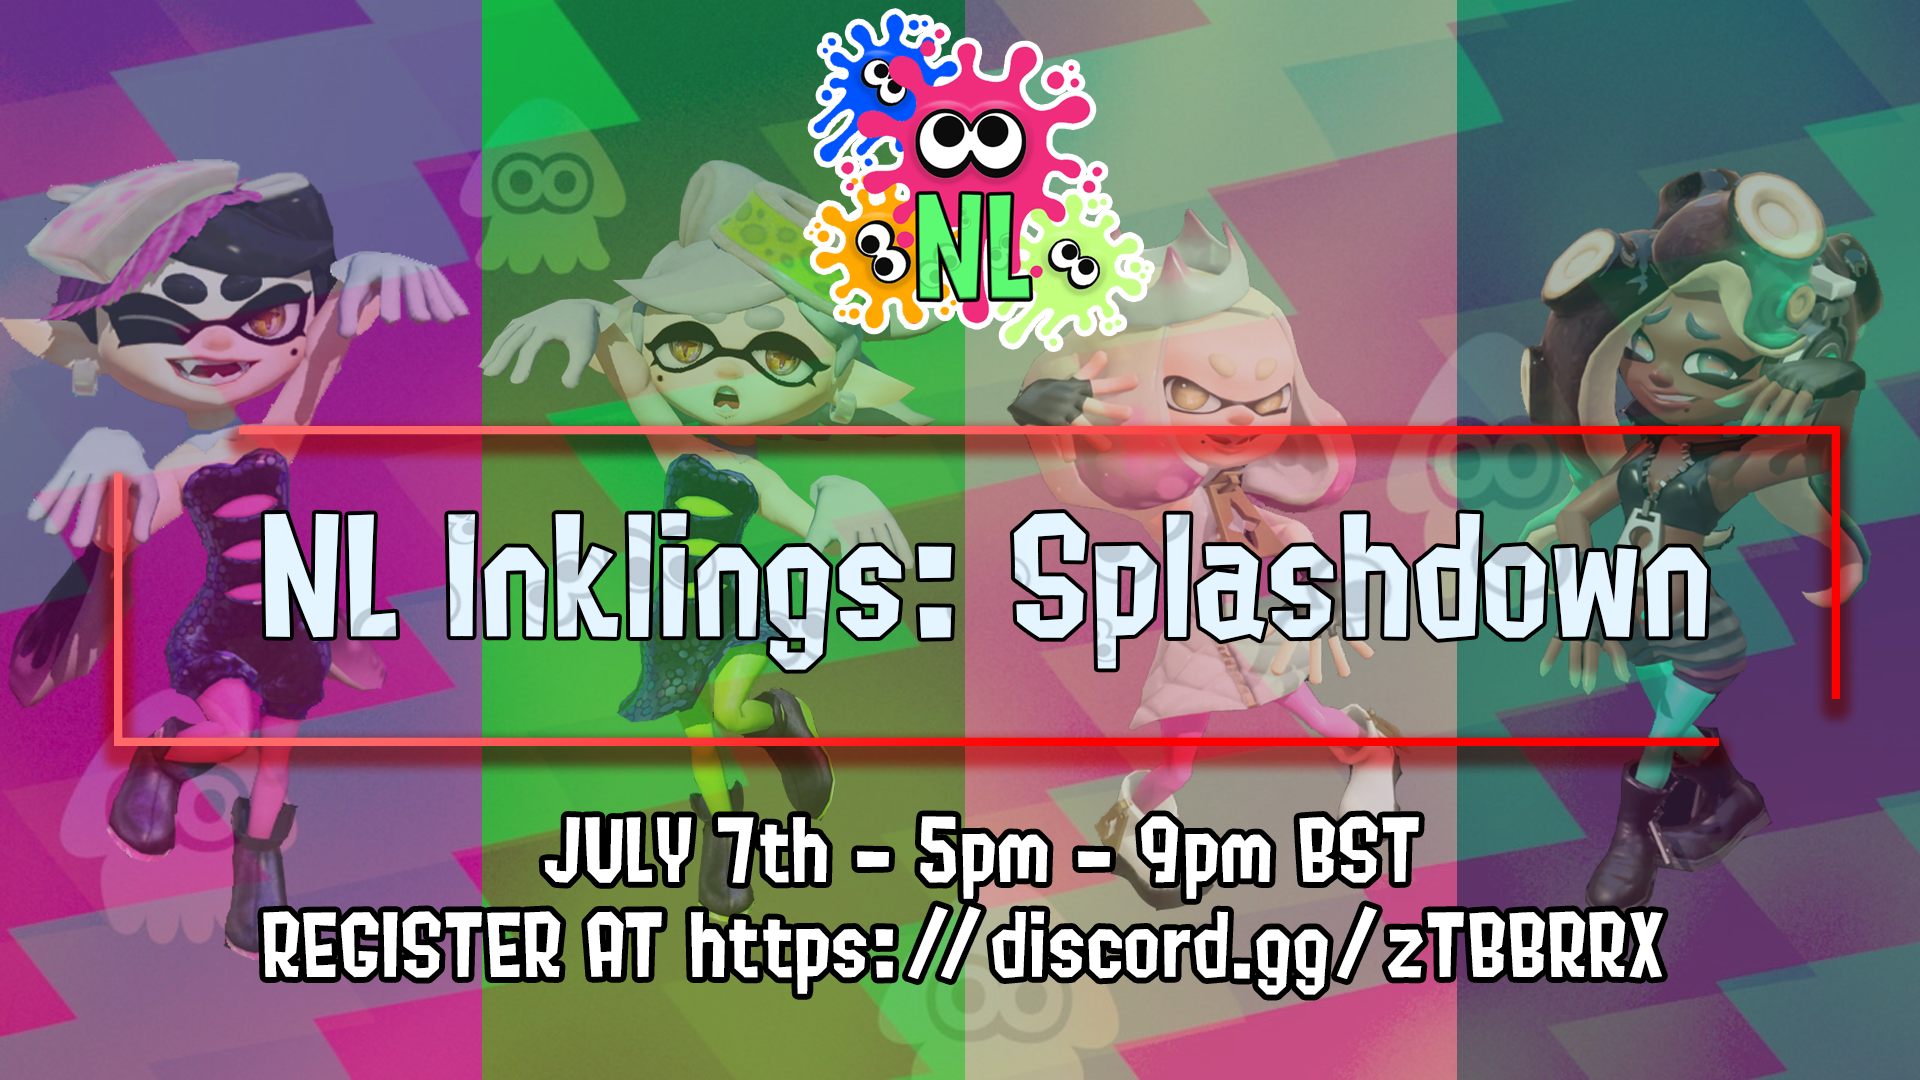 This is a standard NL Inklings Tournament for Splatoon 2!